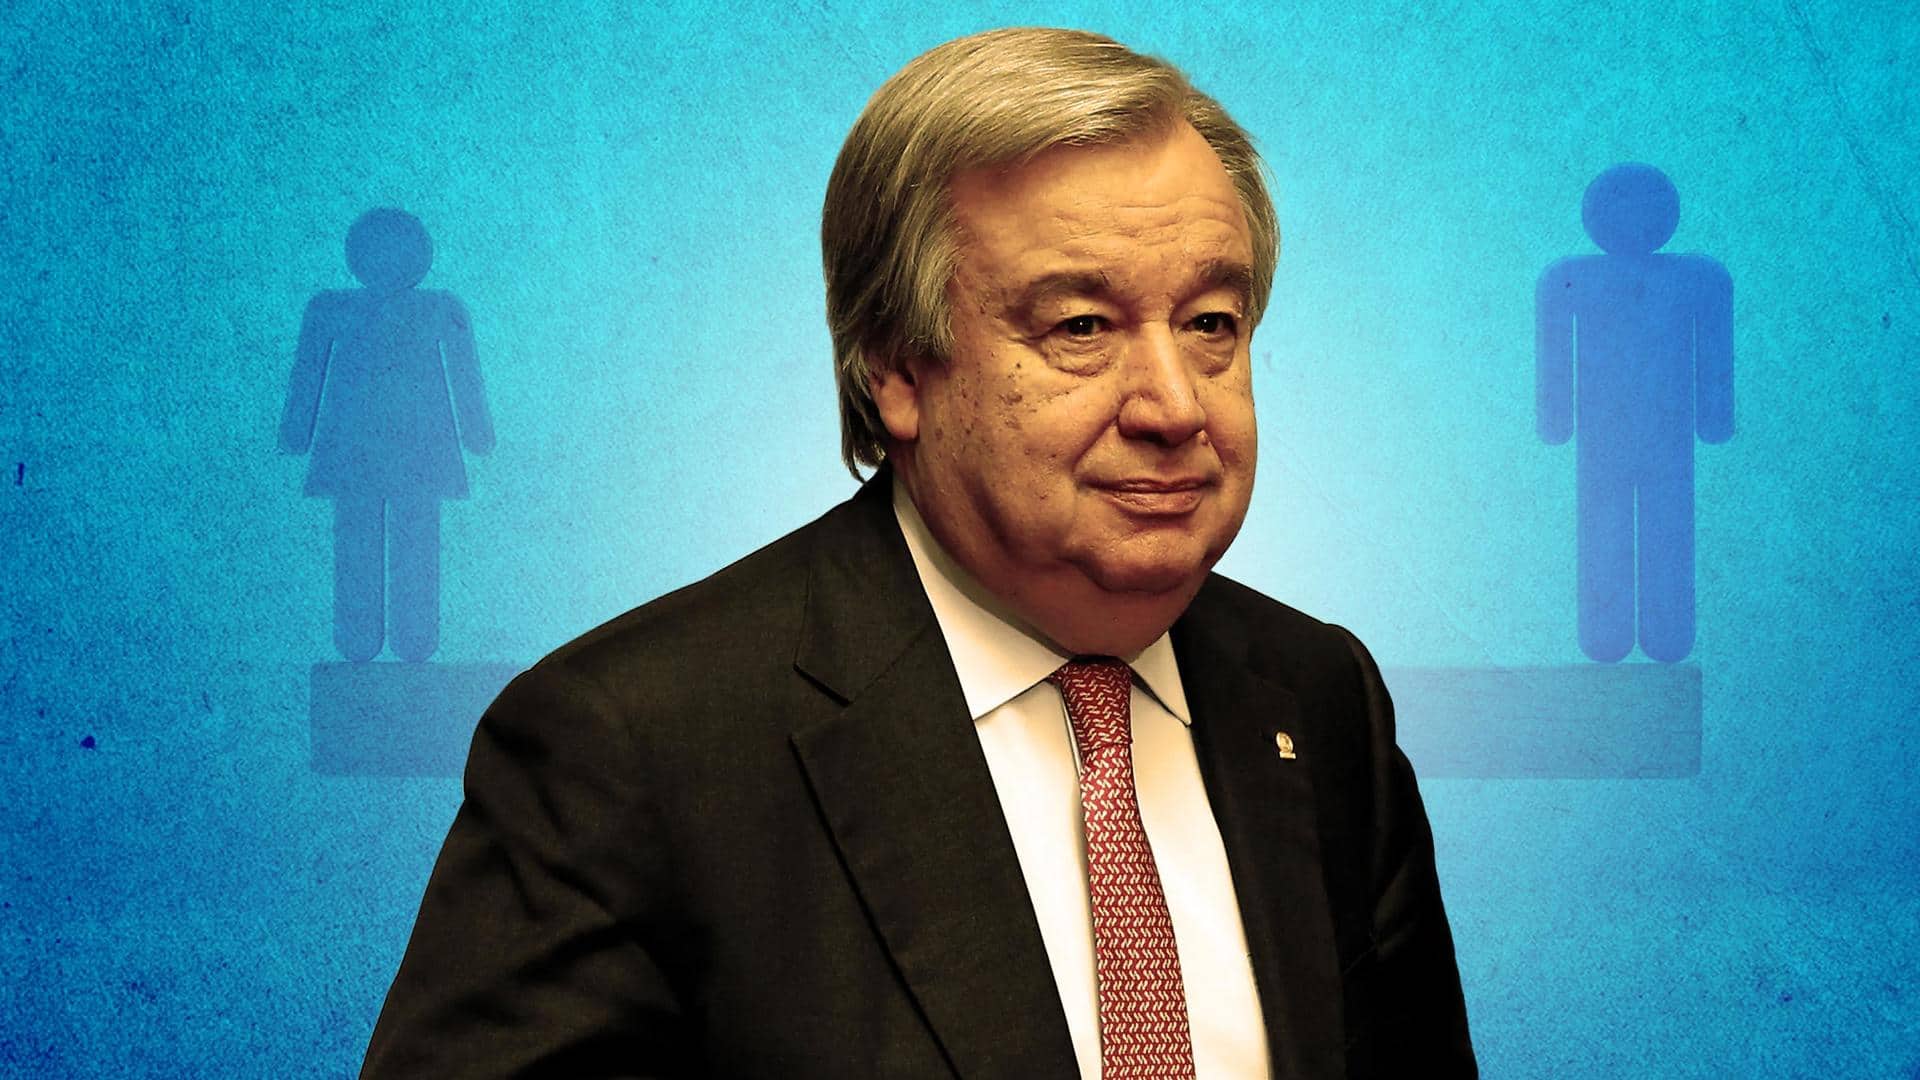 Gender equality 300 years away: UN chief on Women's Day